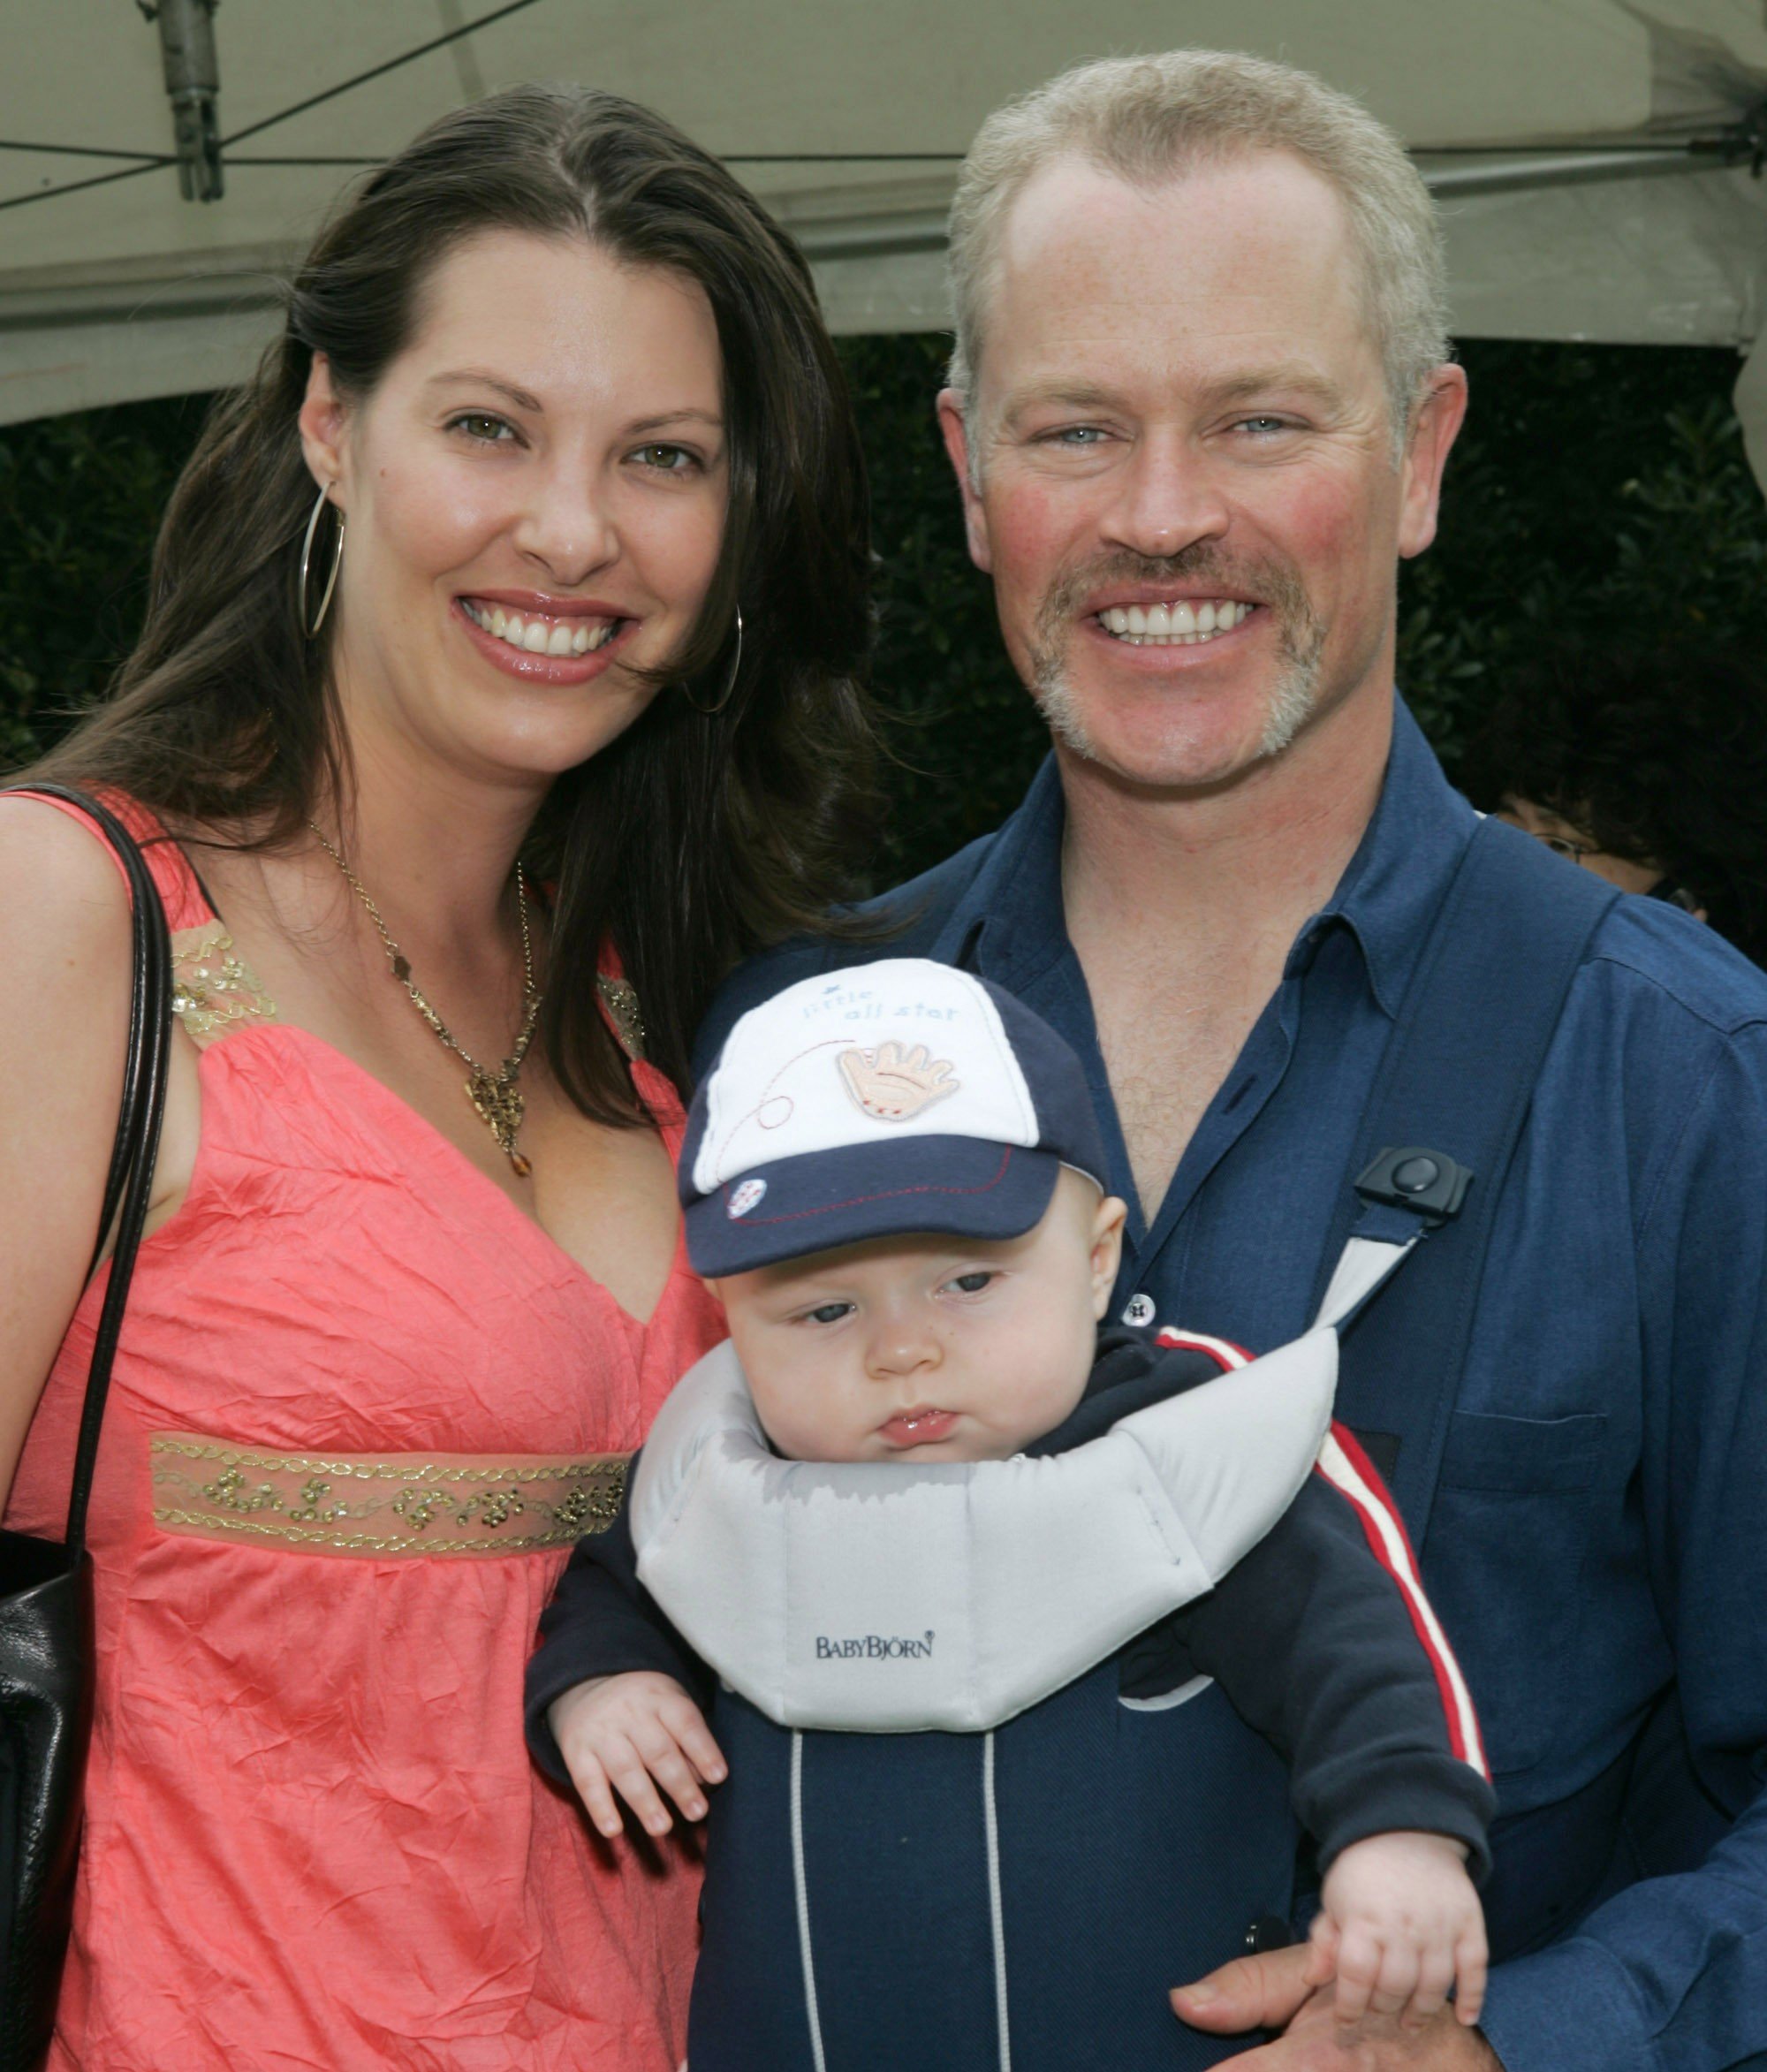 Ruve, Neal and Morgan McDonough in Hollywood, California in 2006. | Source: Getty Images